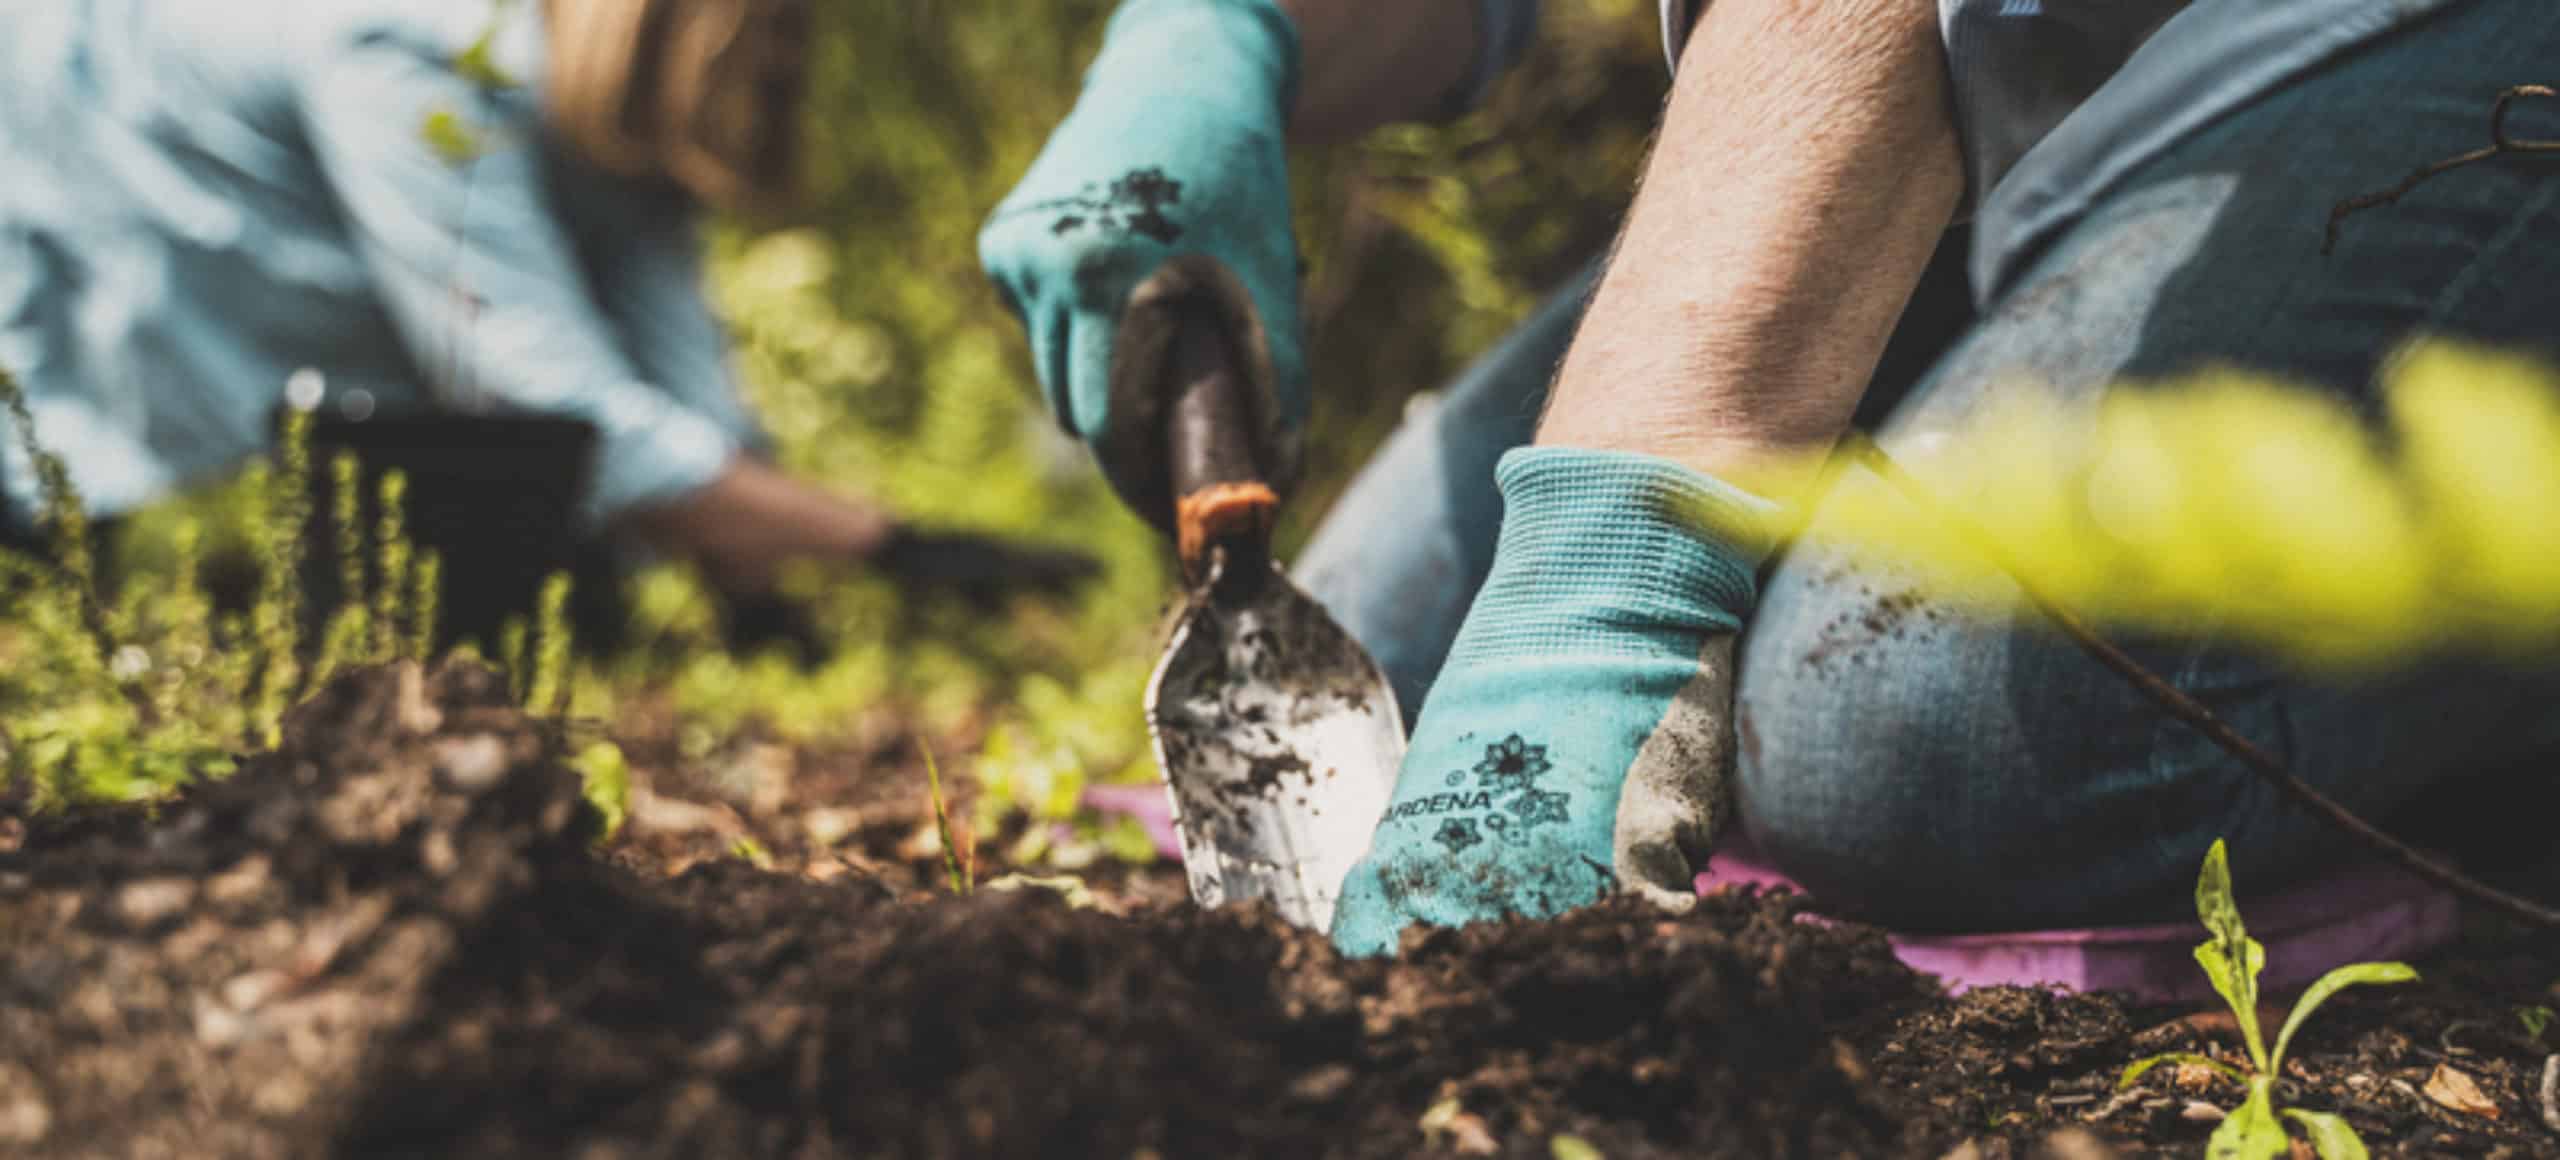 Two volunteers wearing gardening gloves dig with tools in the dirt to install plants